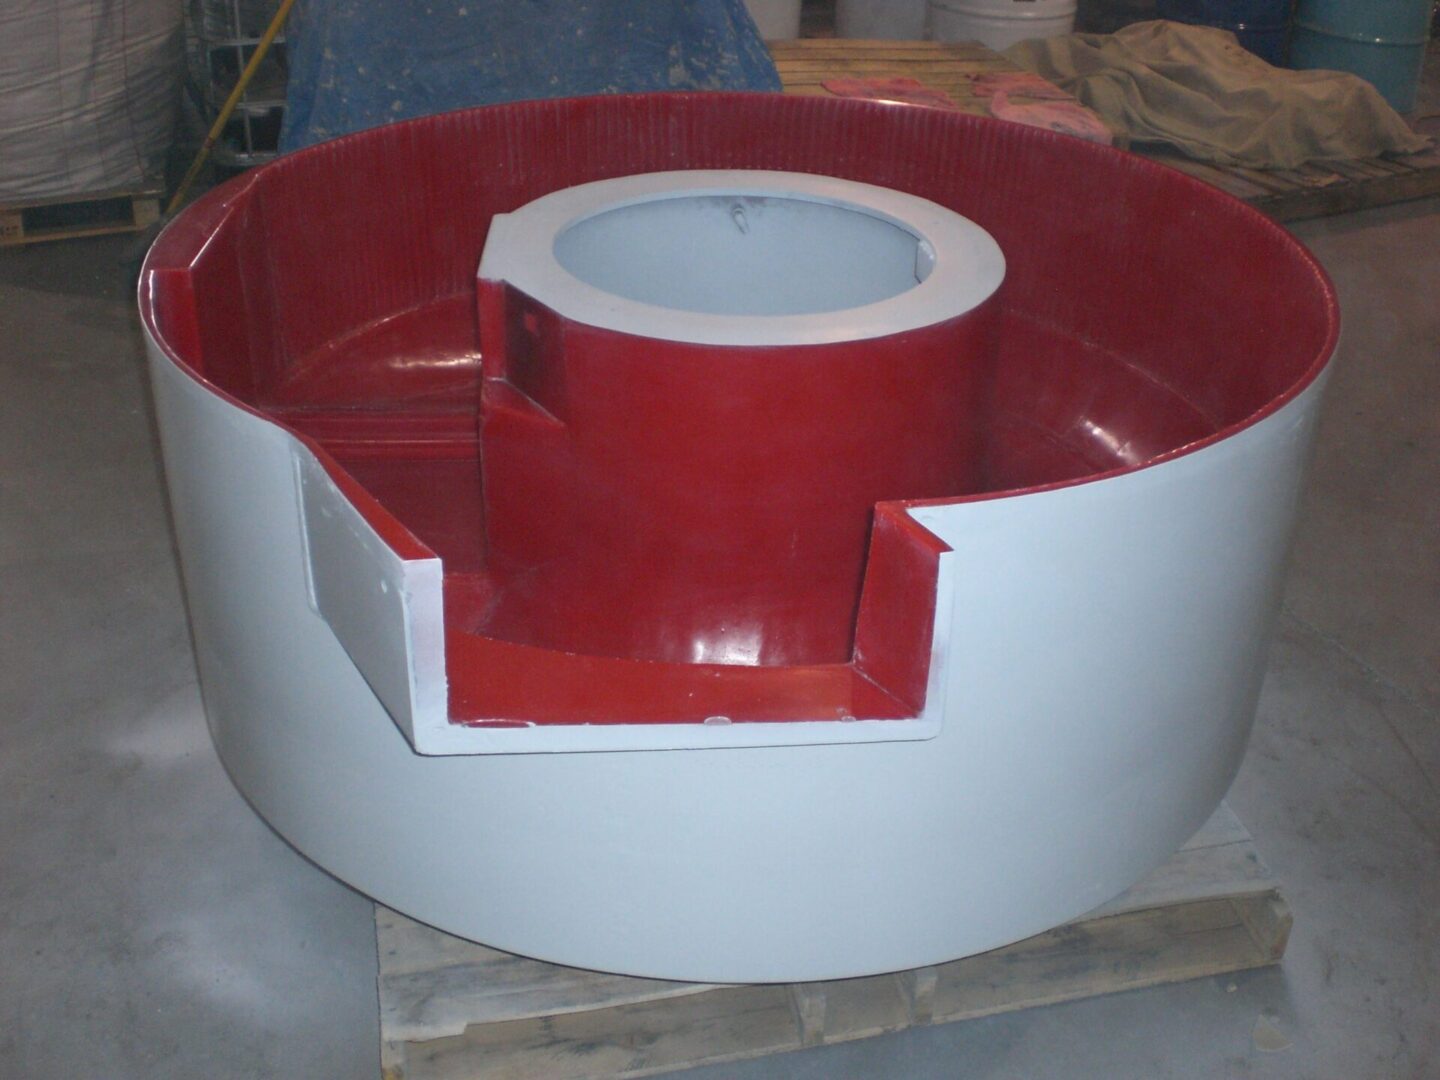 A red and white bowl sitting on top of a table.